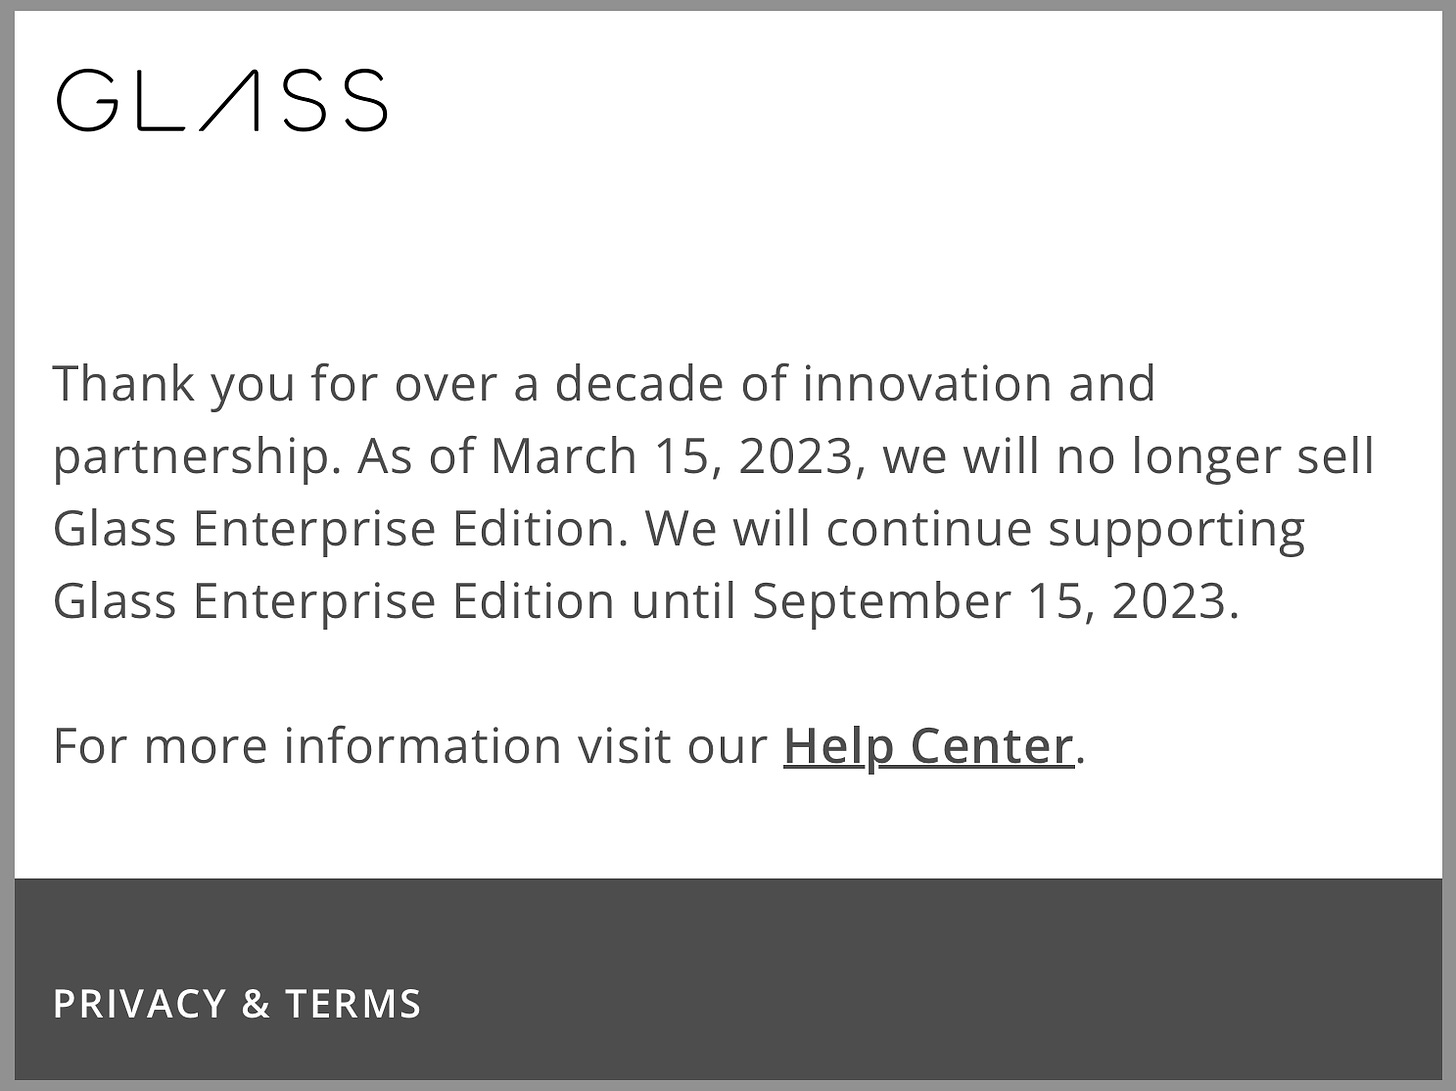 Thank you for over a decade of innovation and partnership. As of March 15, 2023, we will no longer sell Glass Enterprise Edition. We will continue supporting Glass Enterprise Edition until September 15, 2023.